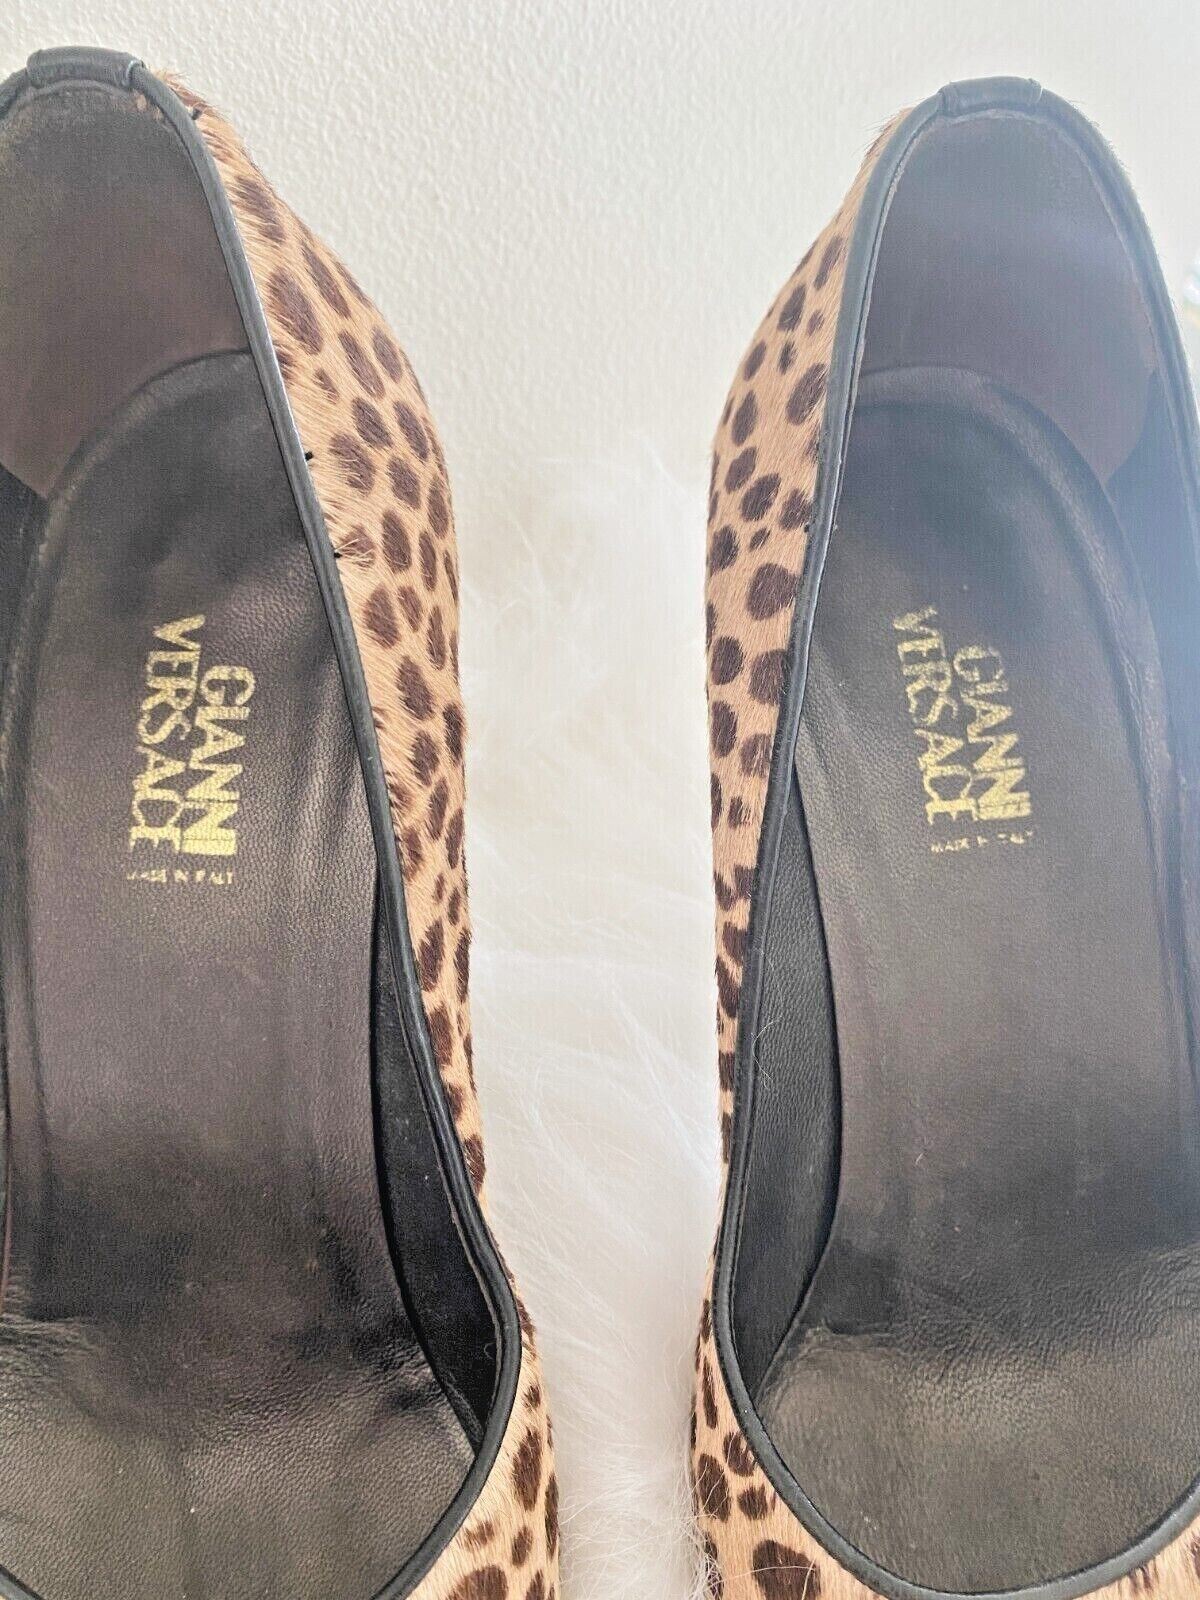 Gianni Versace Leopard Print Heels | Pumps, Great Condition, Leather, Size 38